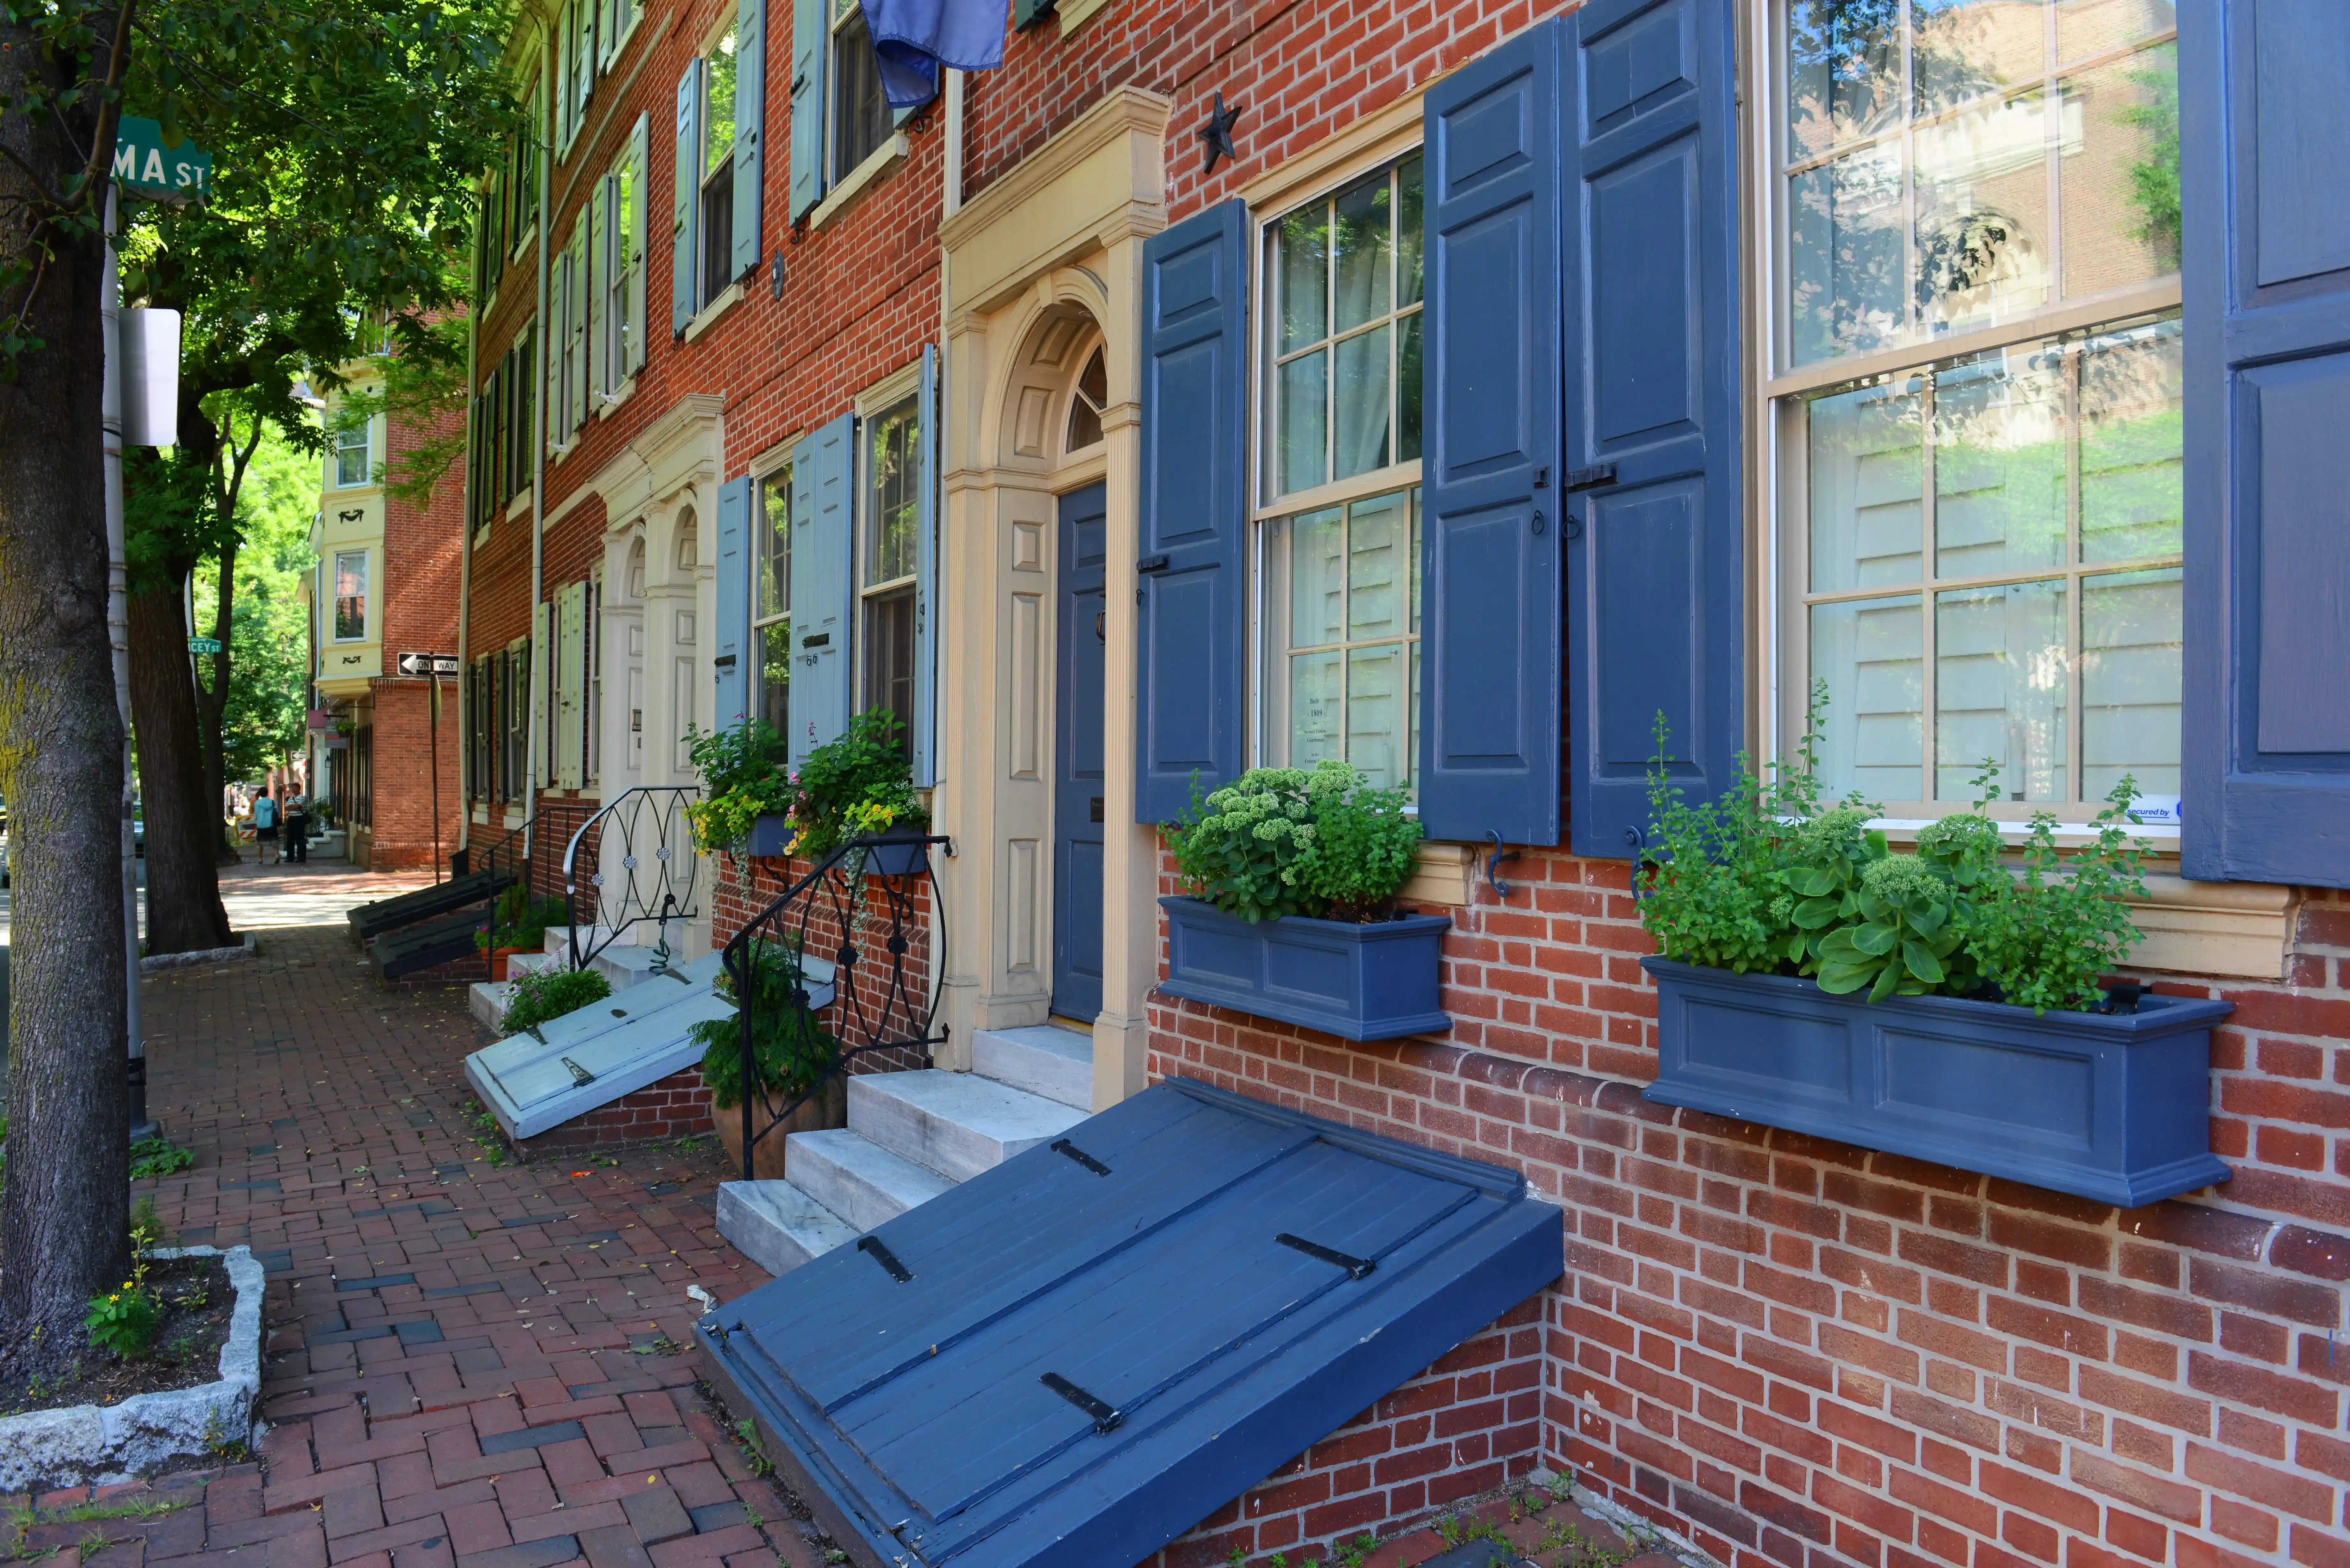 Beautifully renovated historical row homes in Philadelphia with blue shutters and window boxes filled with greenery